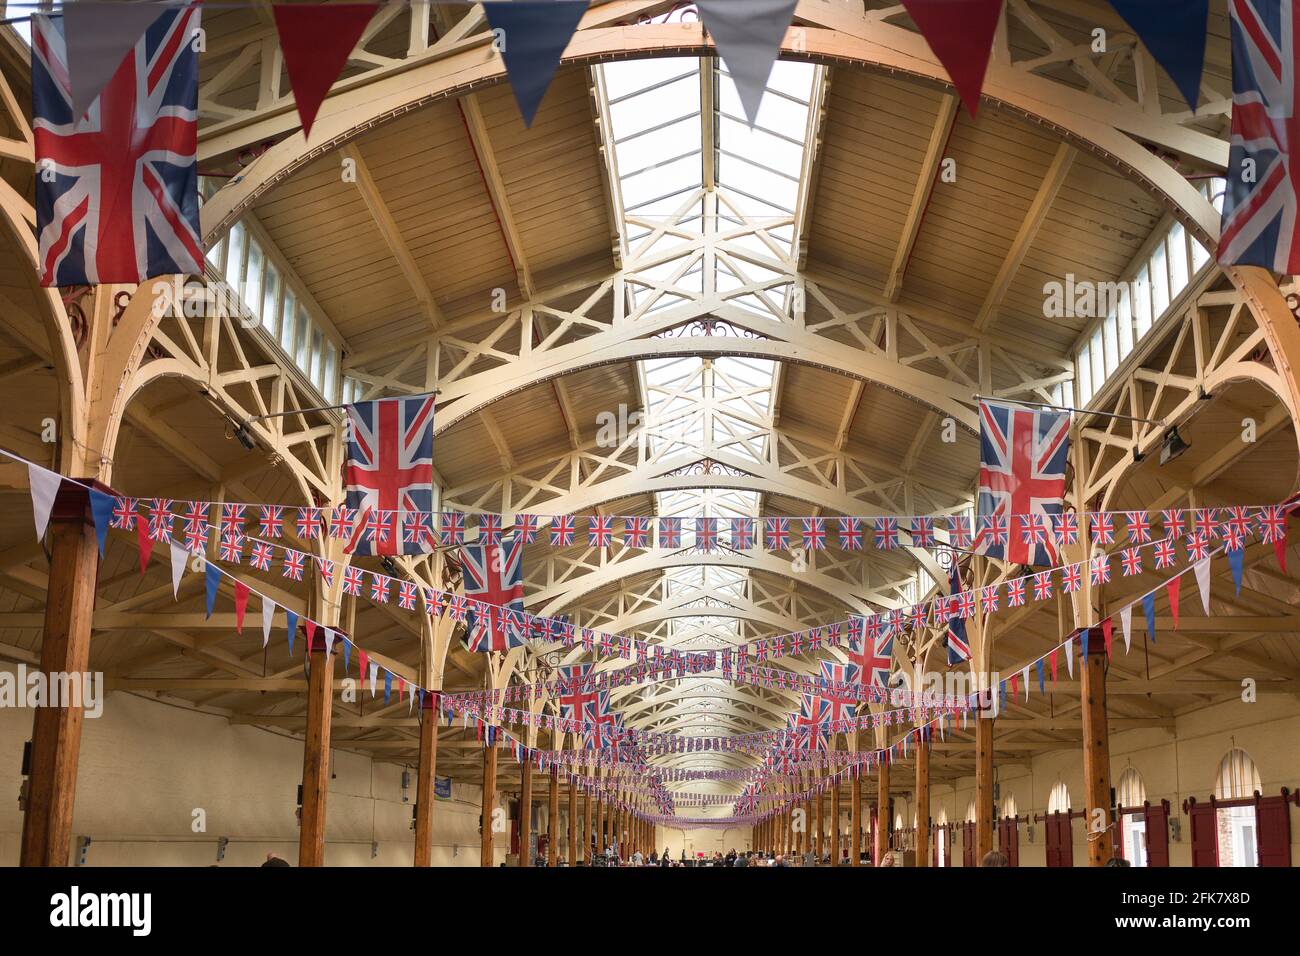 Interior of the old Pannier Market showing roof structure and  lantern lights in Barnstaple Devon England UK Stock Photo